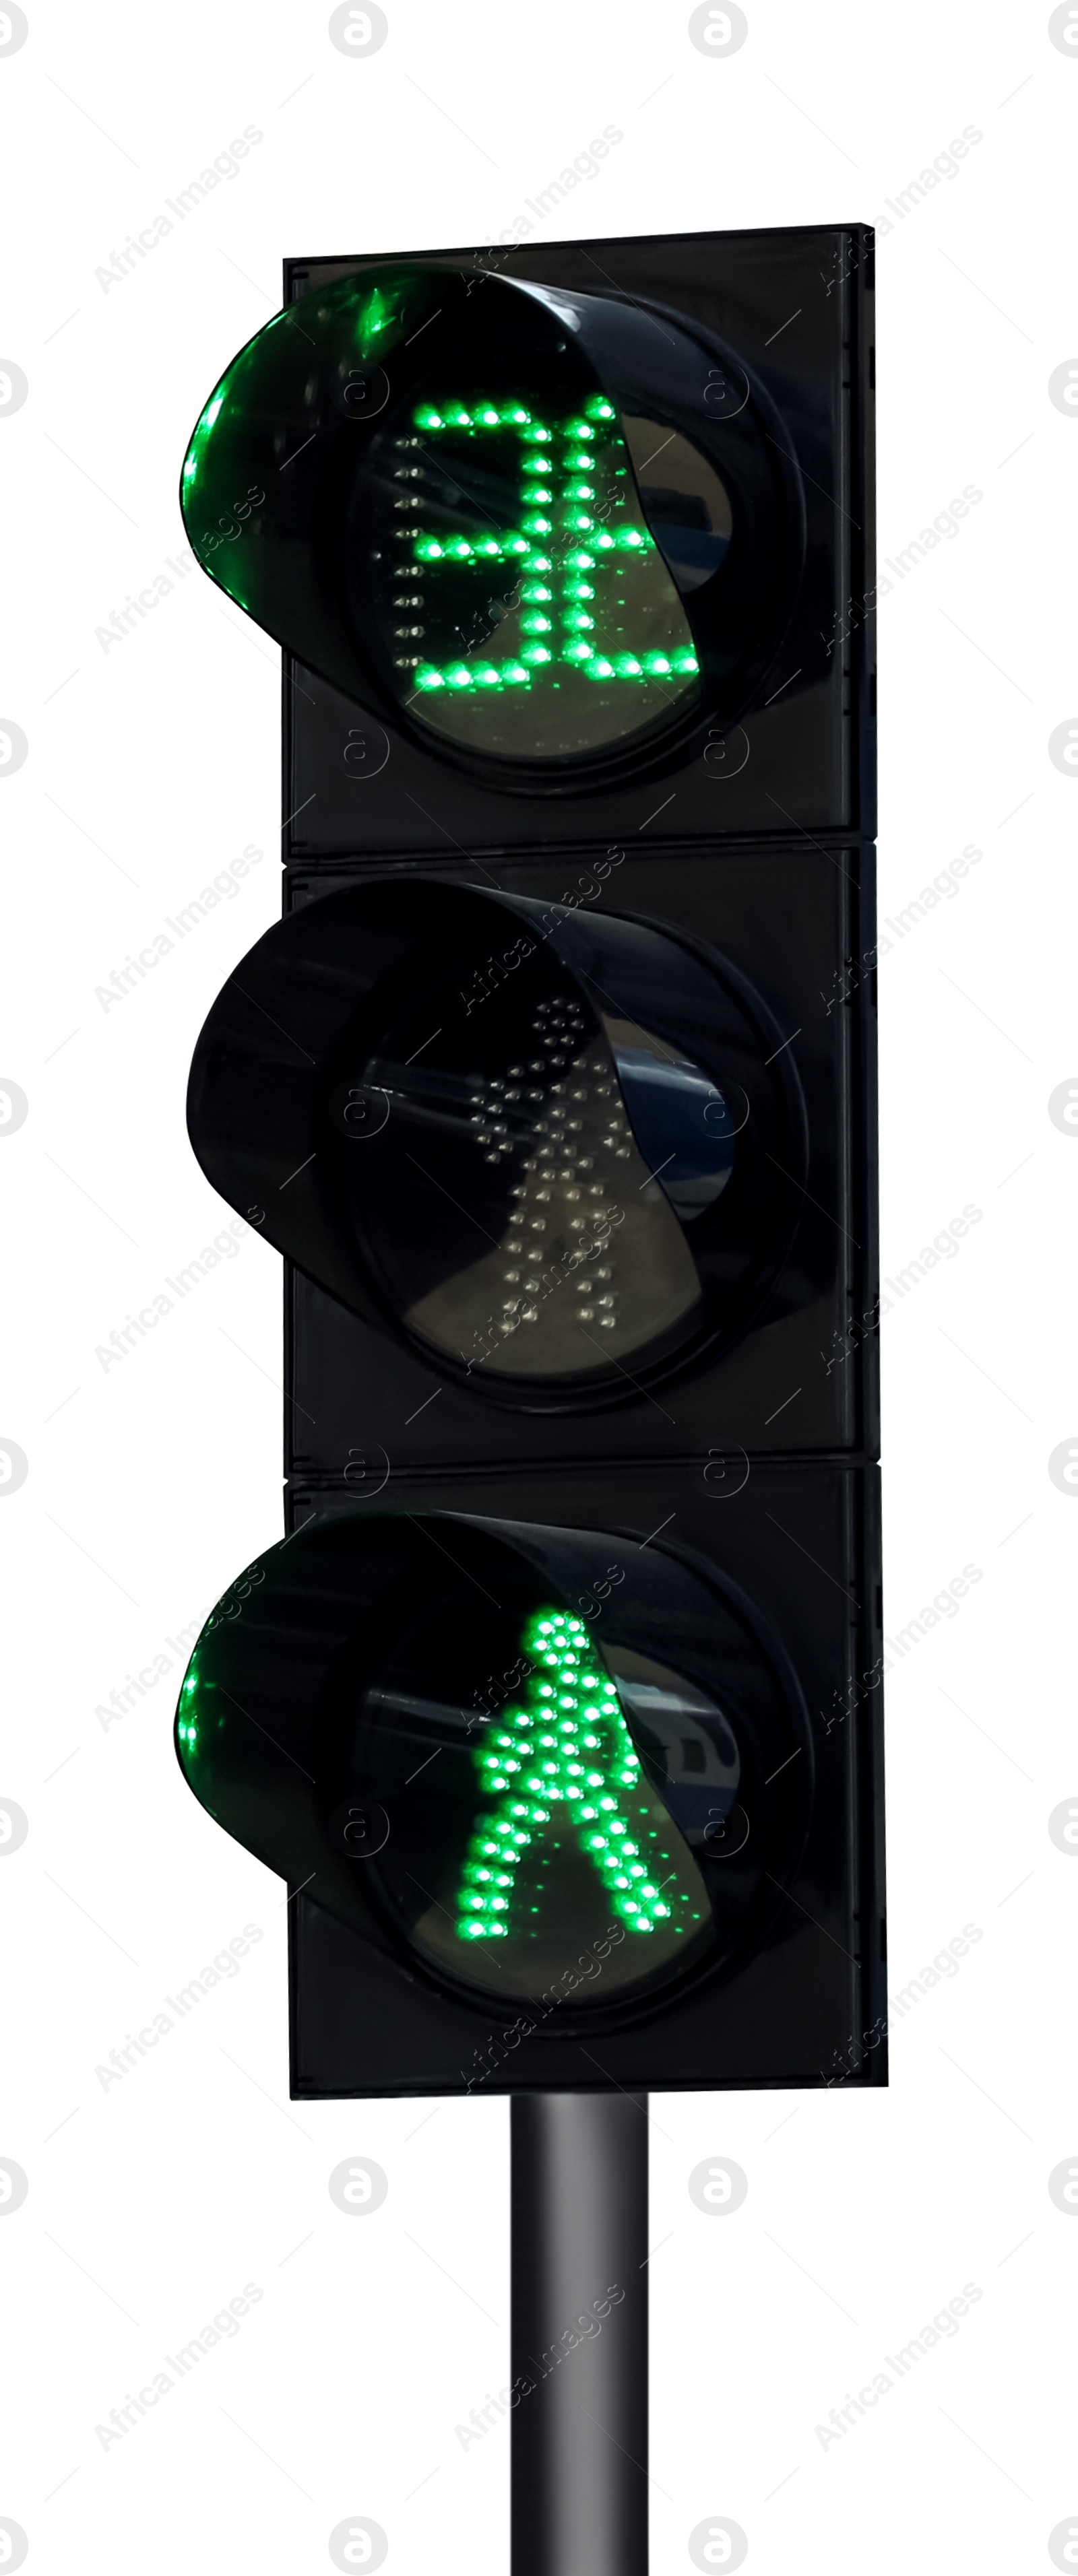 Image of Modern traffic light with timer and pedestrian signals isolated on white